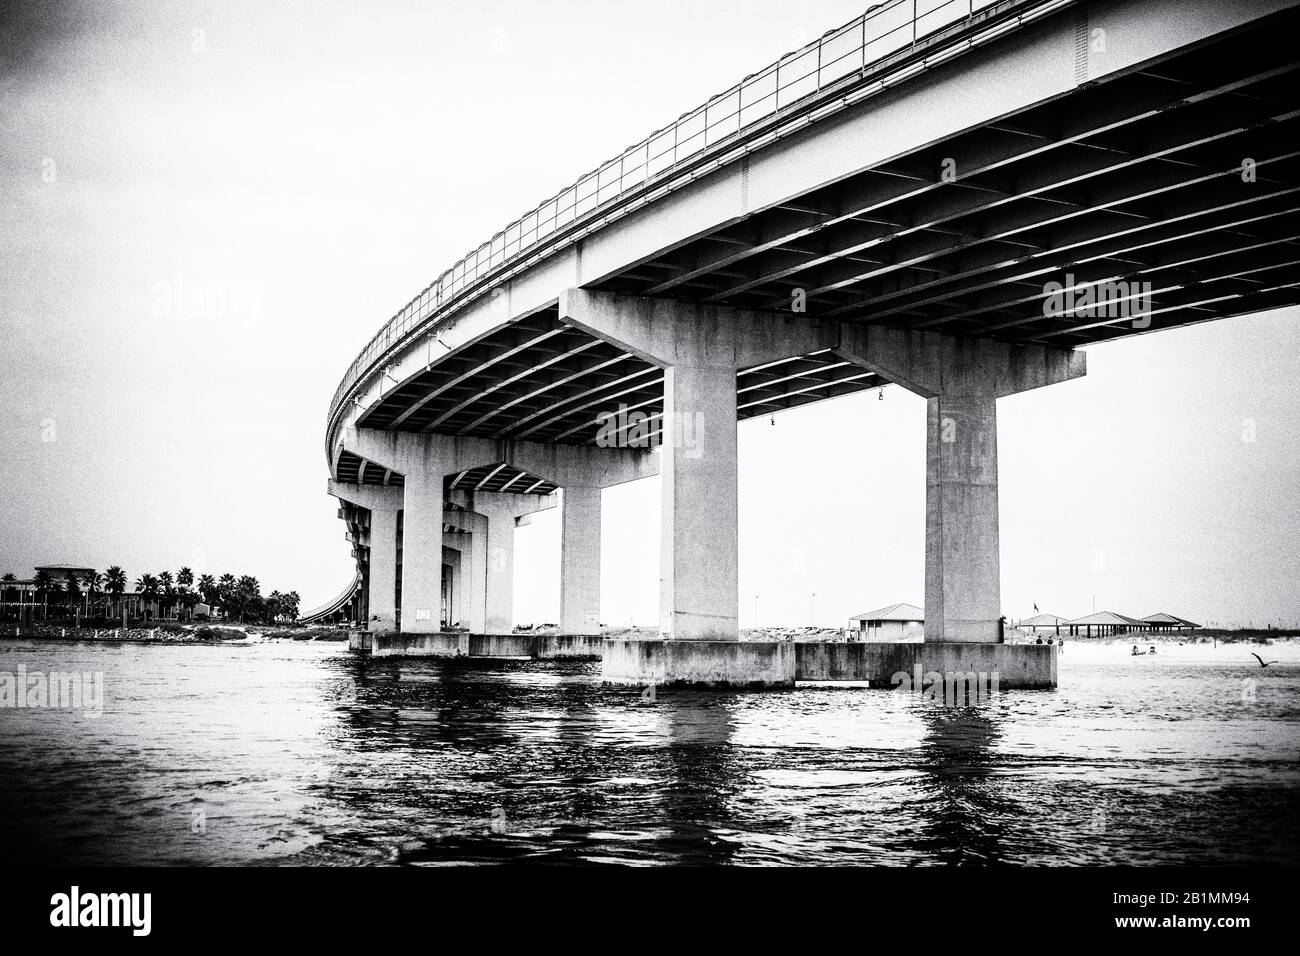 A view from the water under the highway. Stock Photo